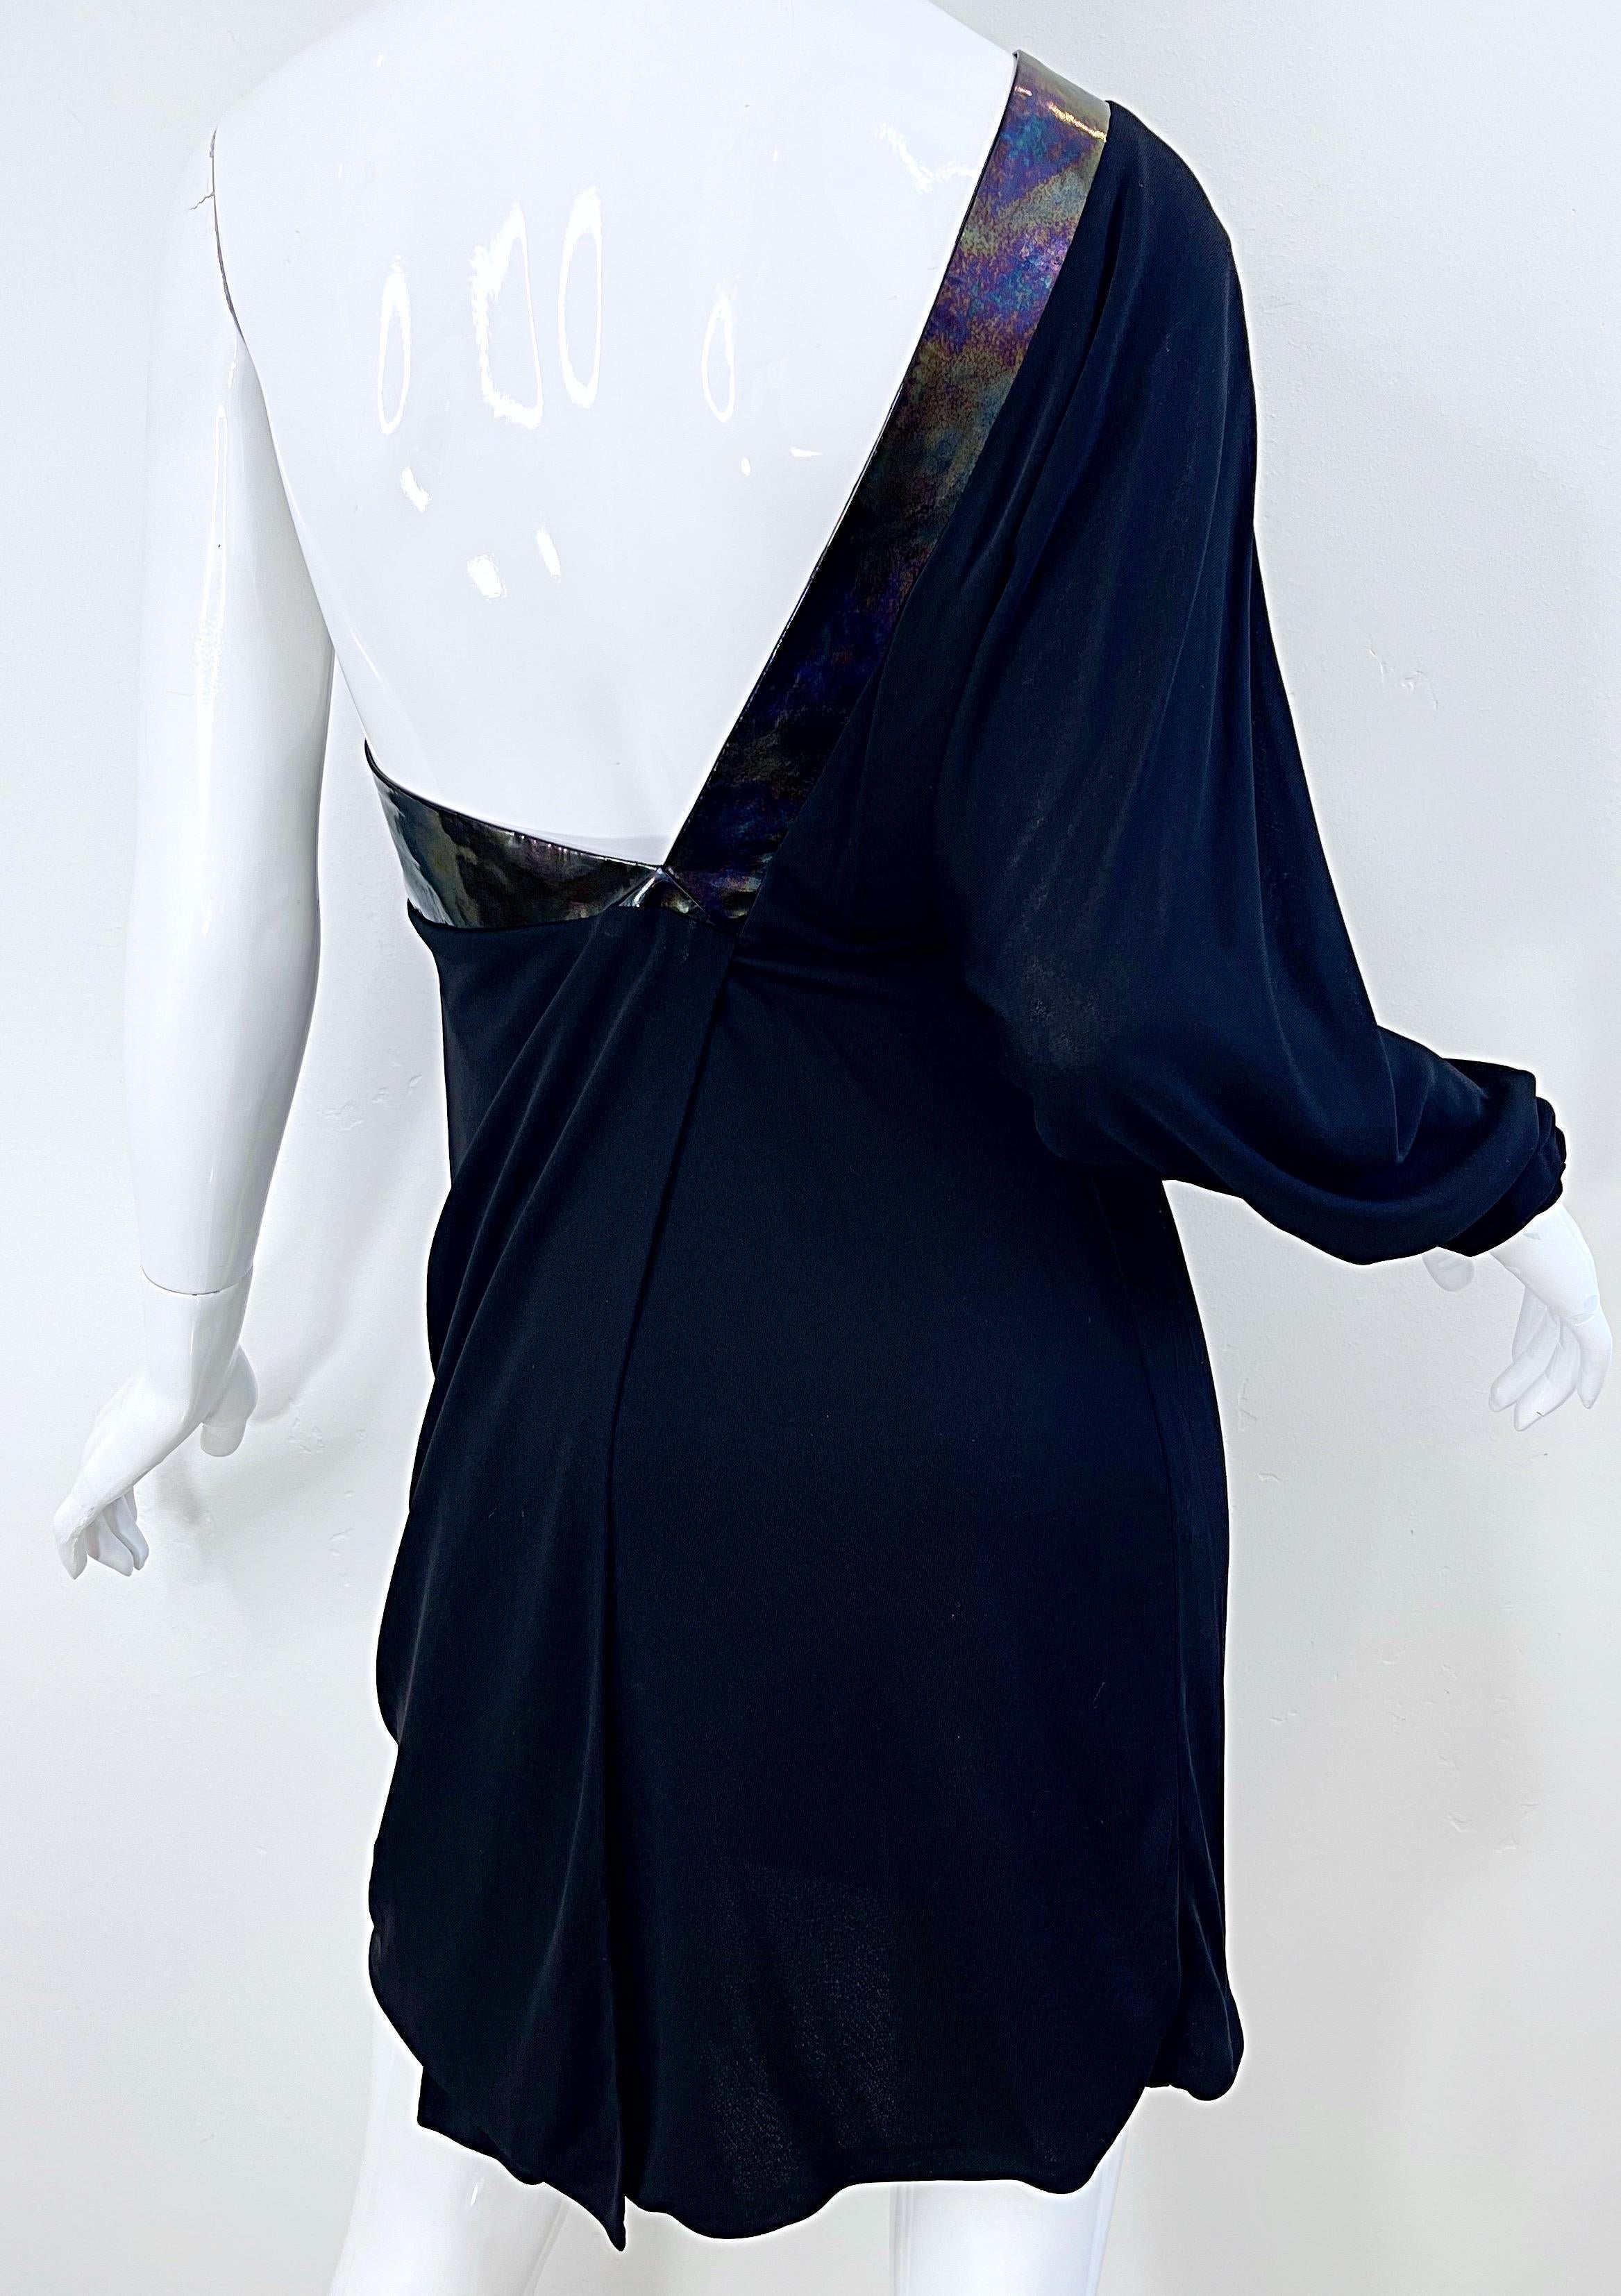 Gucci Fall 2009 Runway One Shoulder Size 40 Rayon Jersey Patent Leather Dress en vente 2